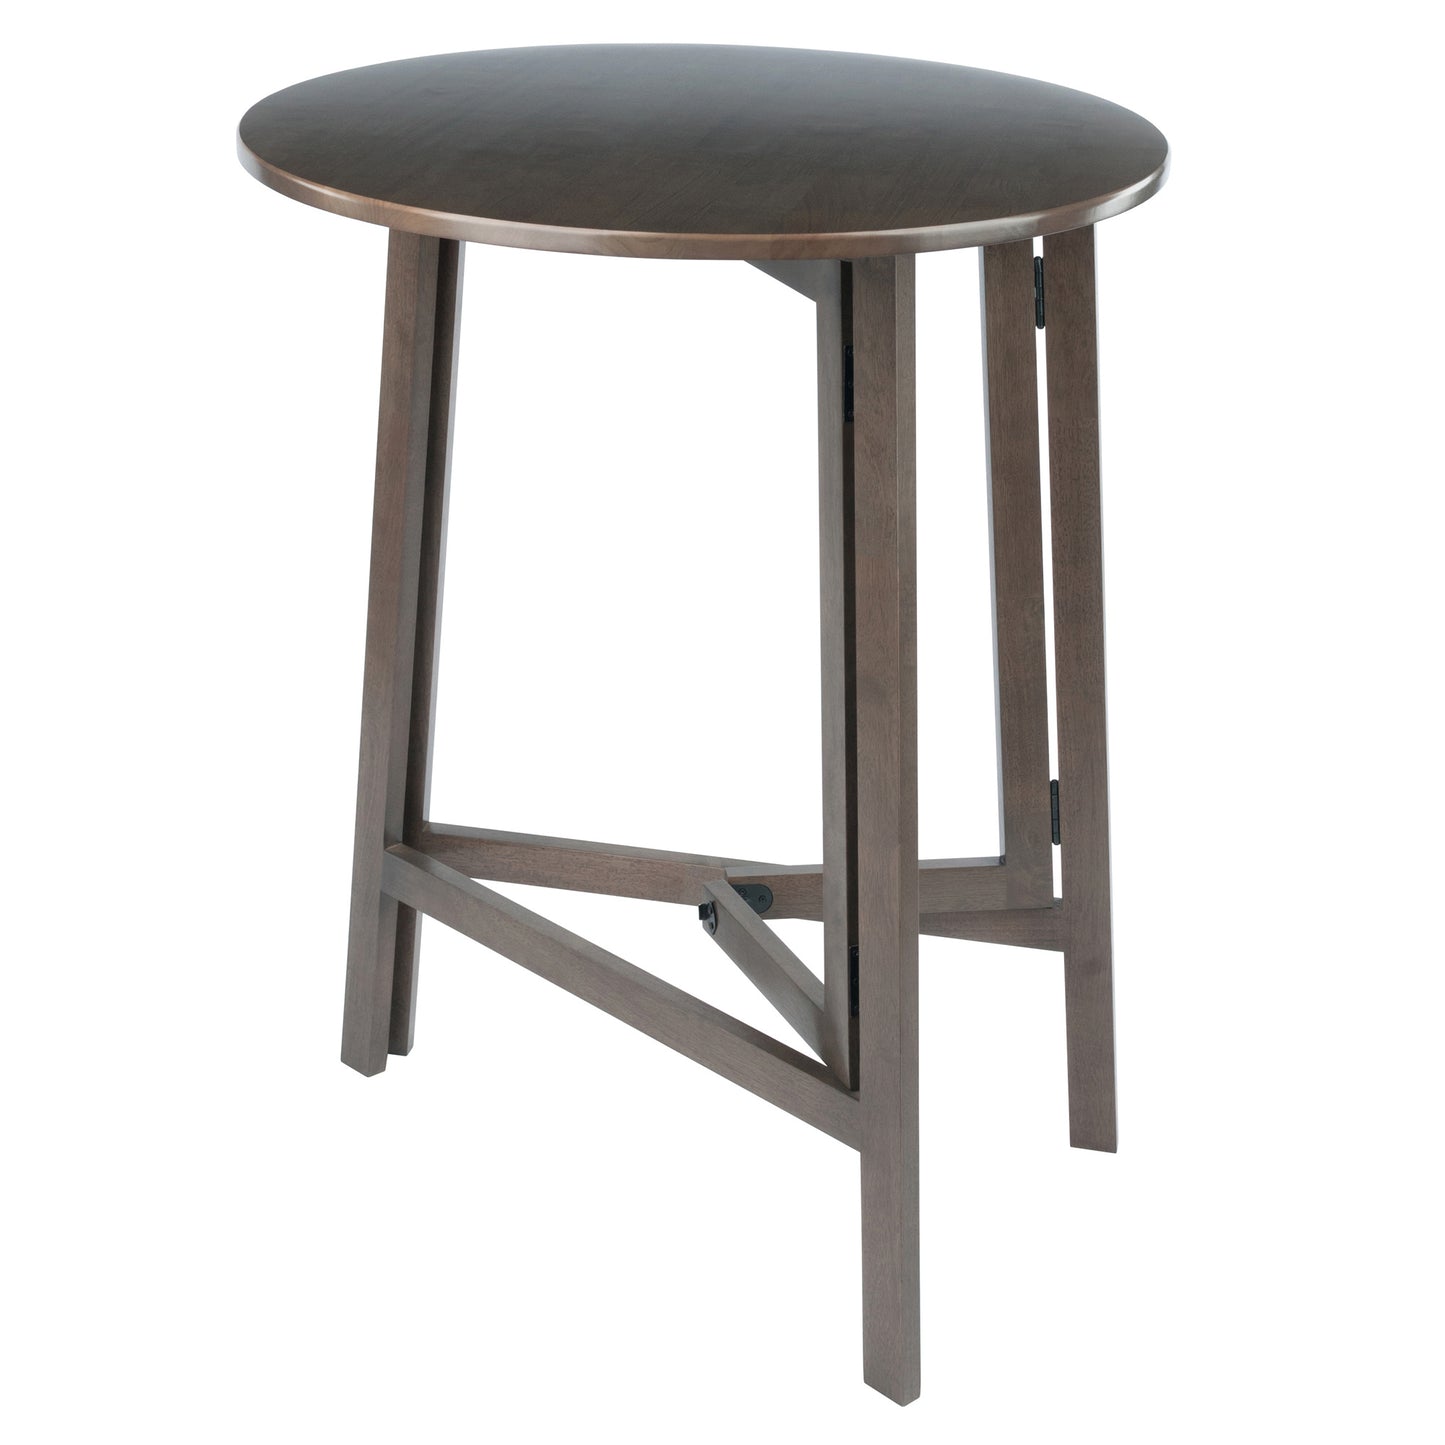 Winsome Wood Torrence Foldable High Table; Torrence Dining; 40 H; Oyster Gray